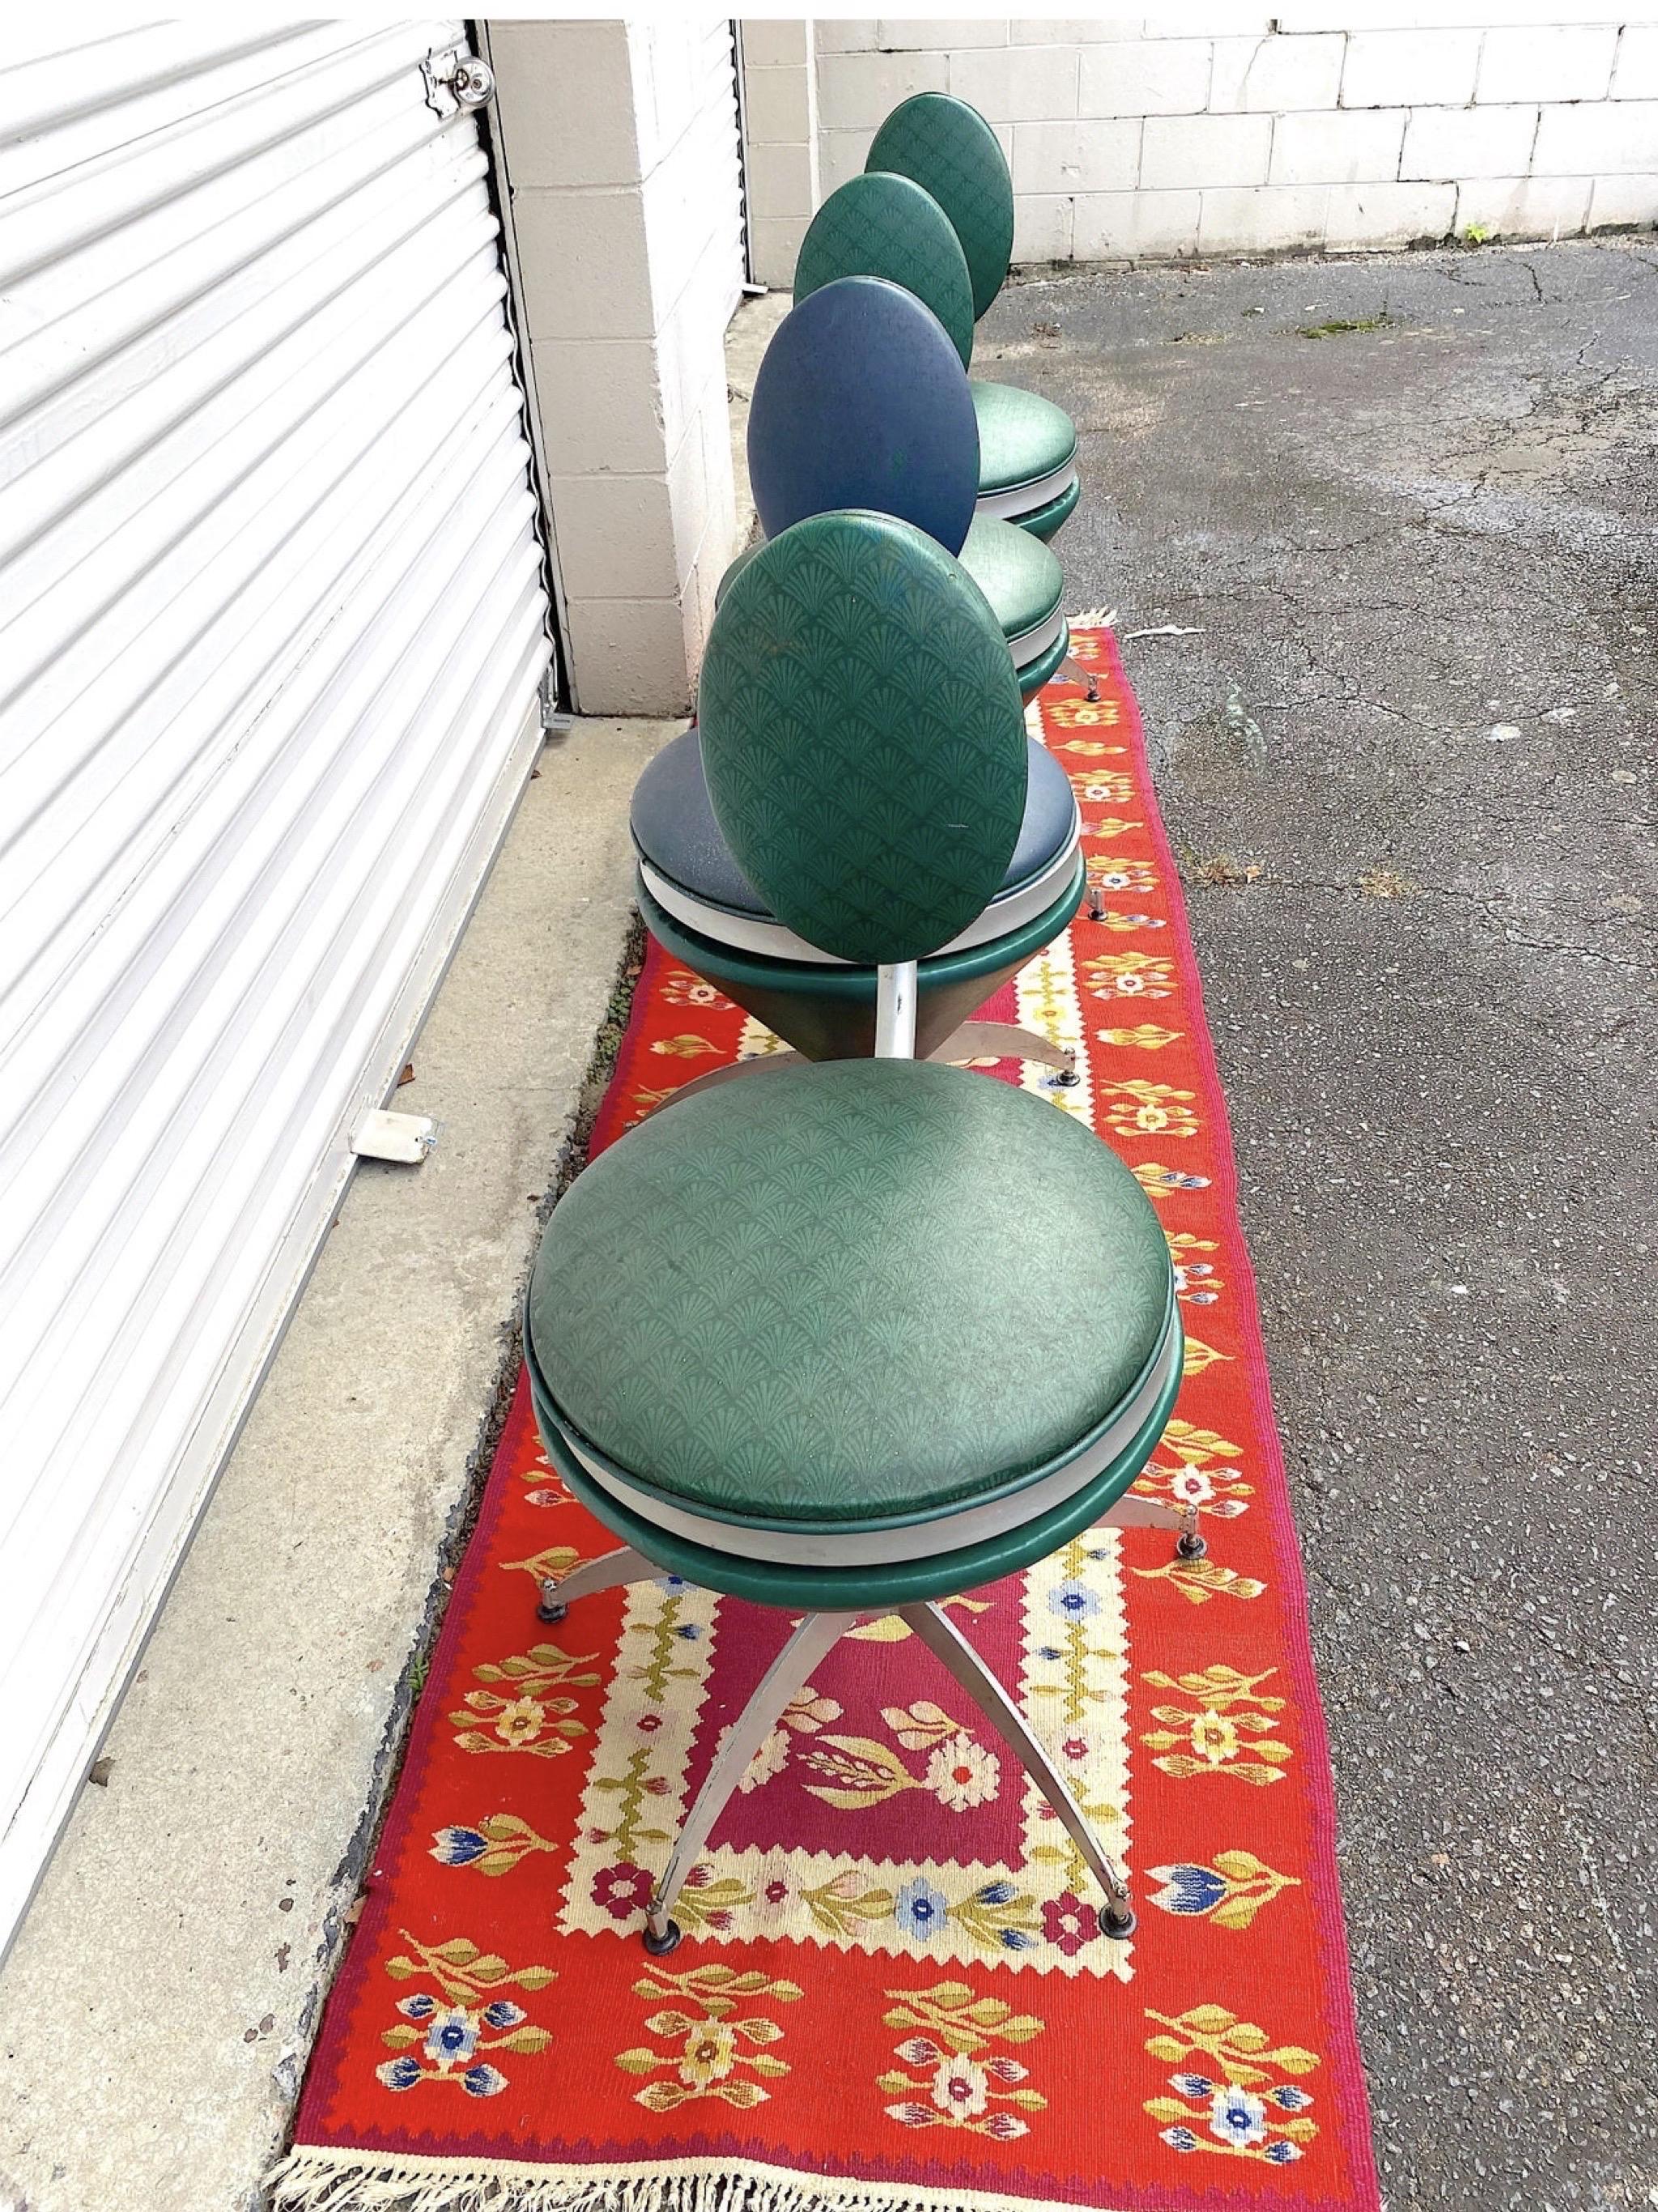 A super funky set of 4 Verner Panton style chairs. Original Art Deco/machine age style with classic Art Deco upholstery. They still swivel 360 degrees but they do show signs of wear at the bases - but still sturdy as ever! The round seats sit on 5